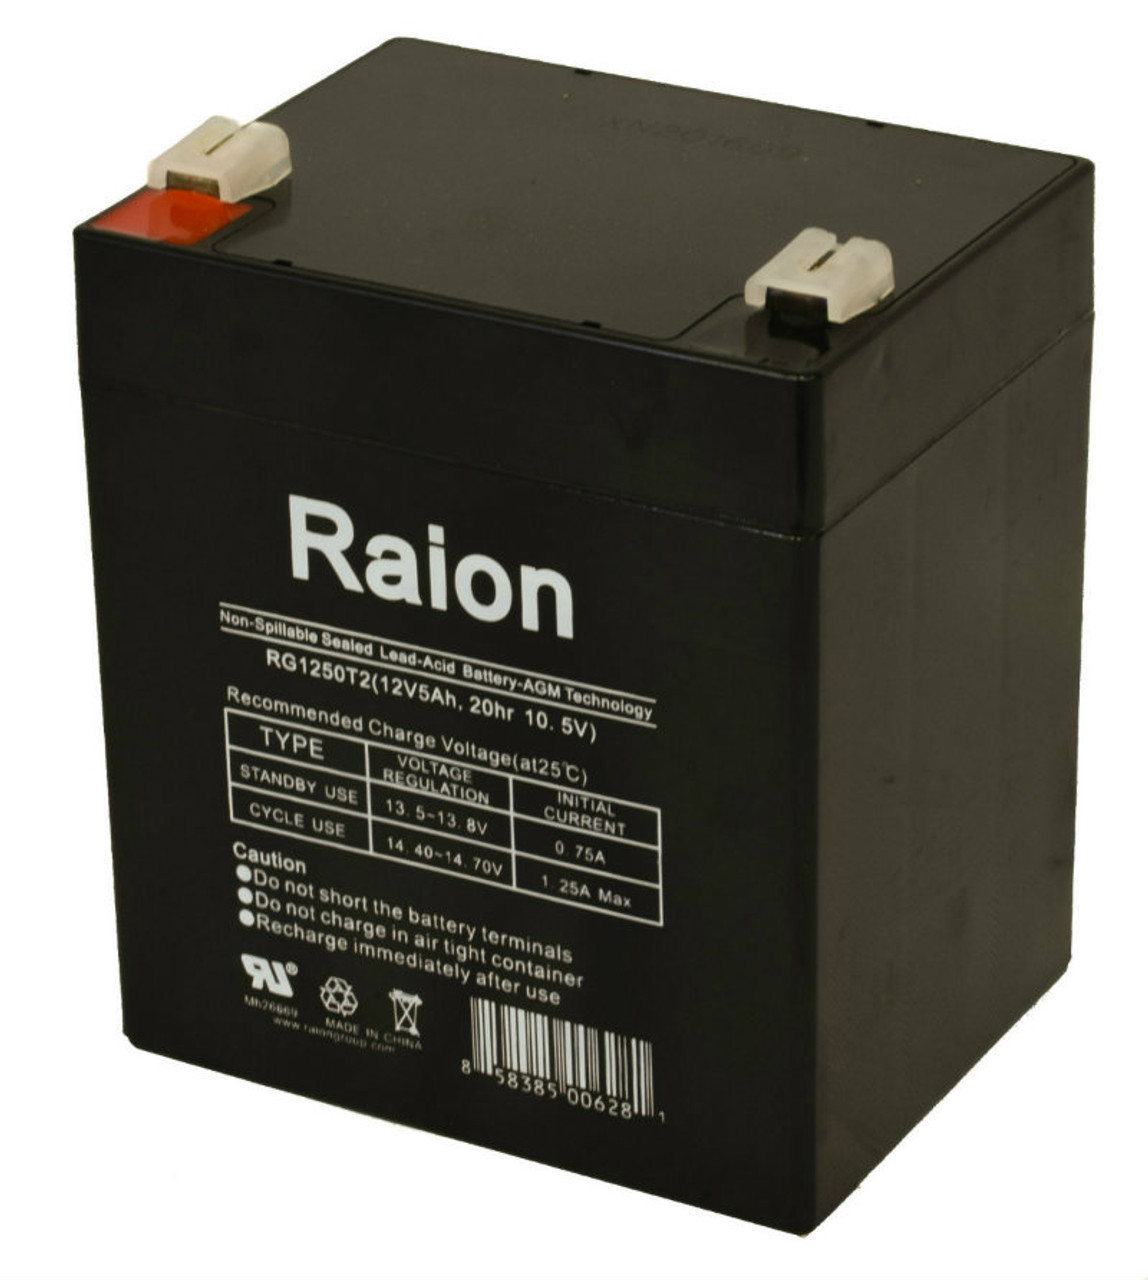 Raion Power RG1250T1 Replacement Alarm Security System Battery for GE Security Concord 4